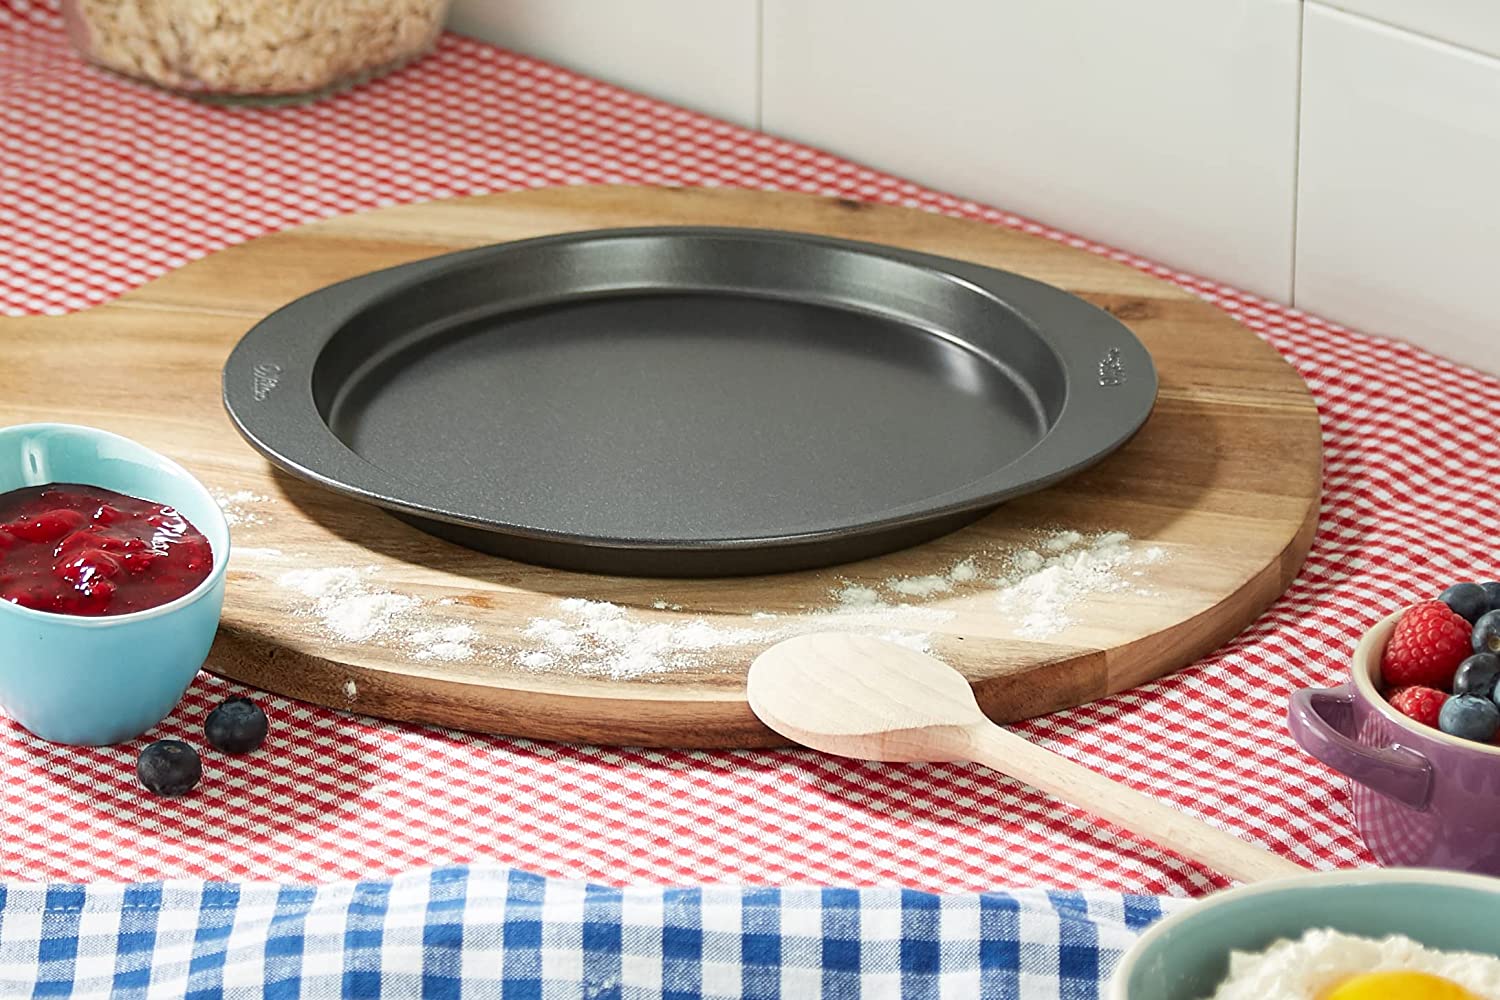 The Top 8 Cake Pans to Purchase